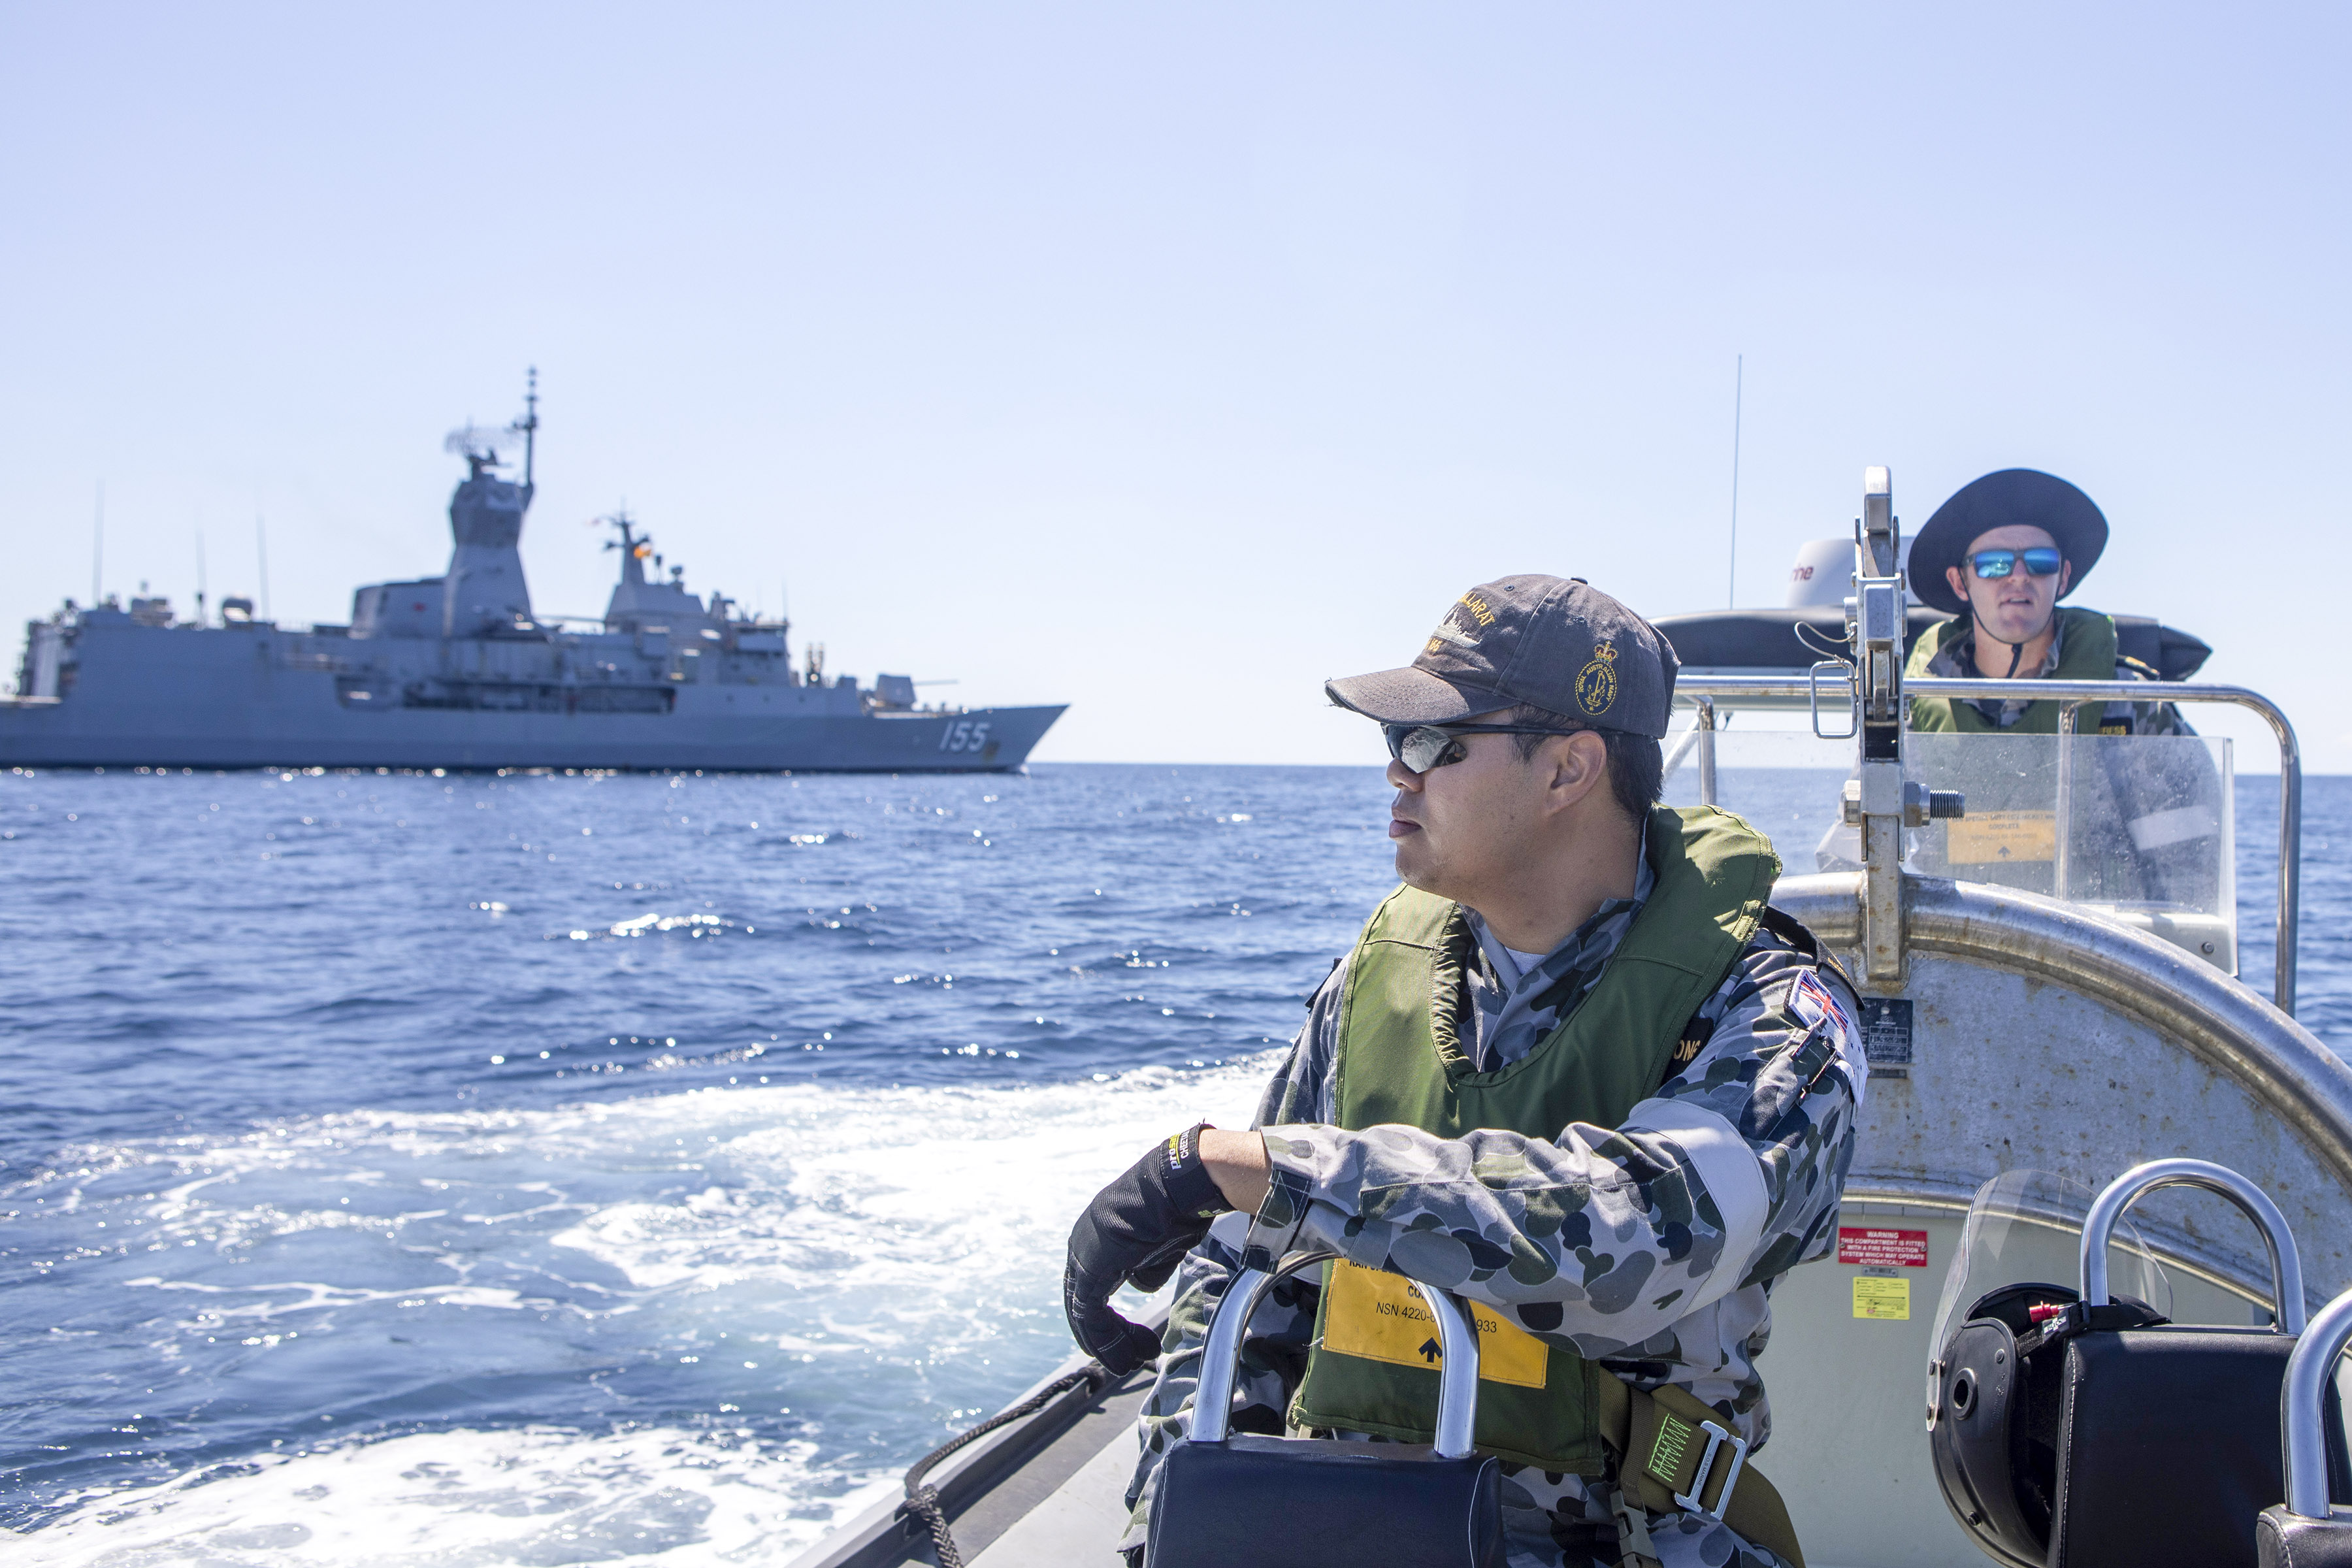 HMAS Ballarat is expected to be in the search area today after transiting the Lombok Strait. 